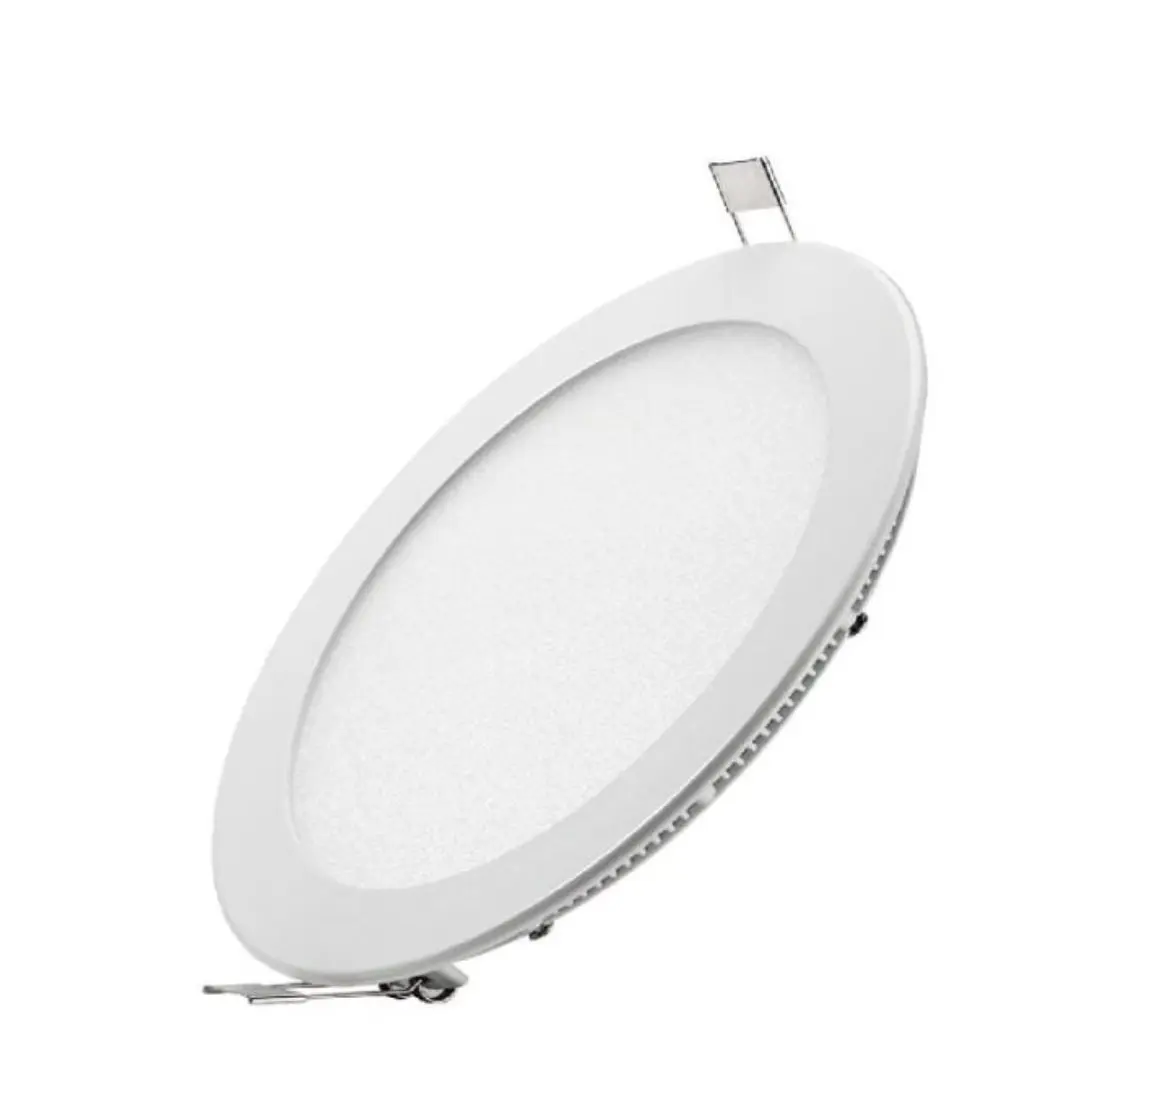 220V/110v 7W 3 Color Dimmable Round Led Recessed Ceiling Panel Light Led Down Light Downlight Fixture Lamp Ceiling Lamp